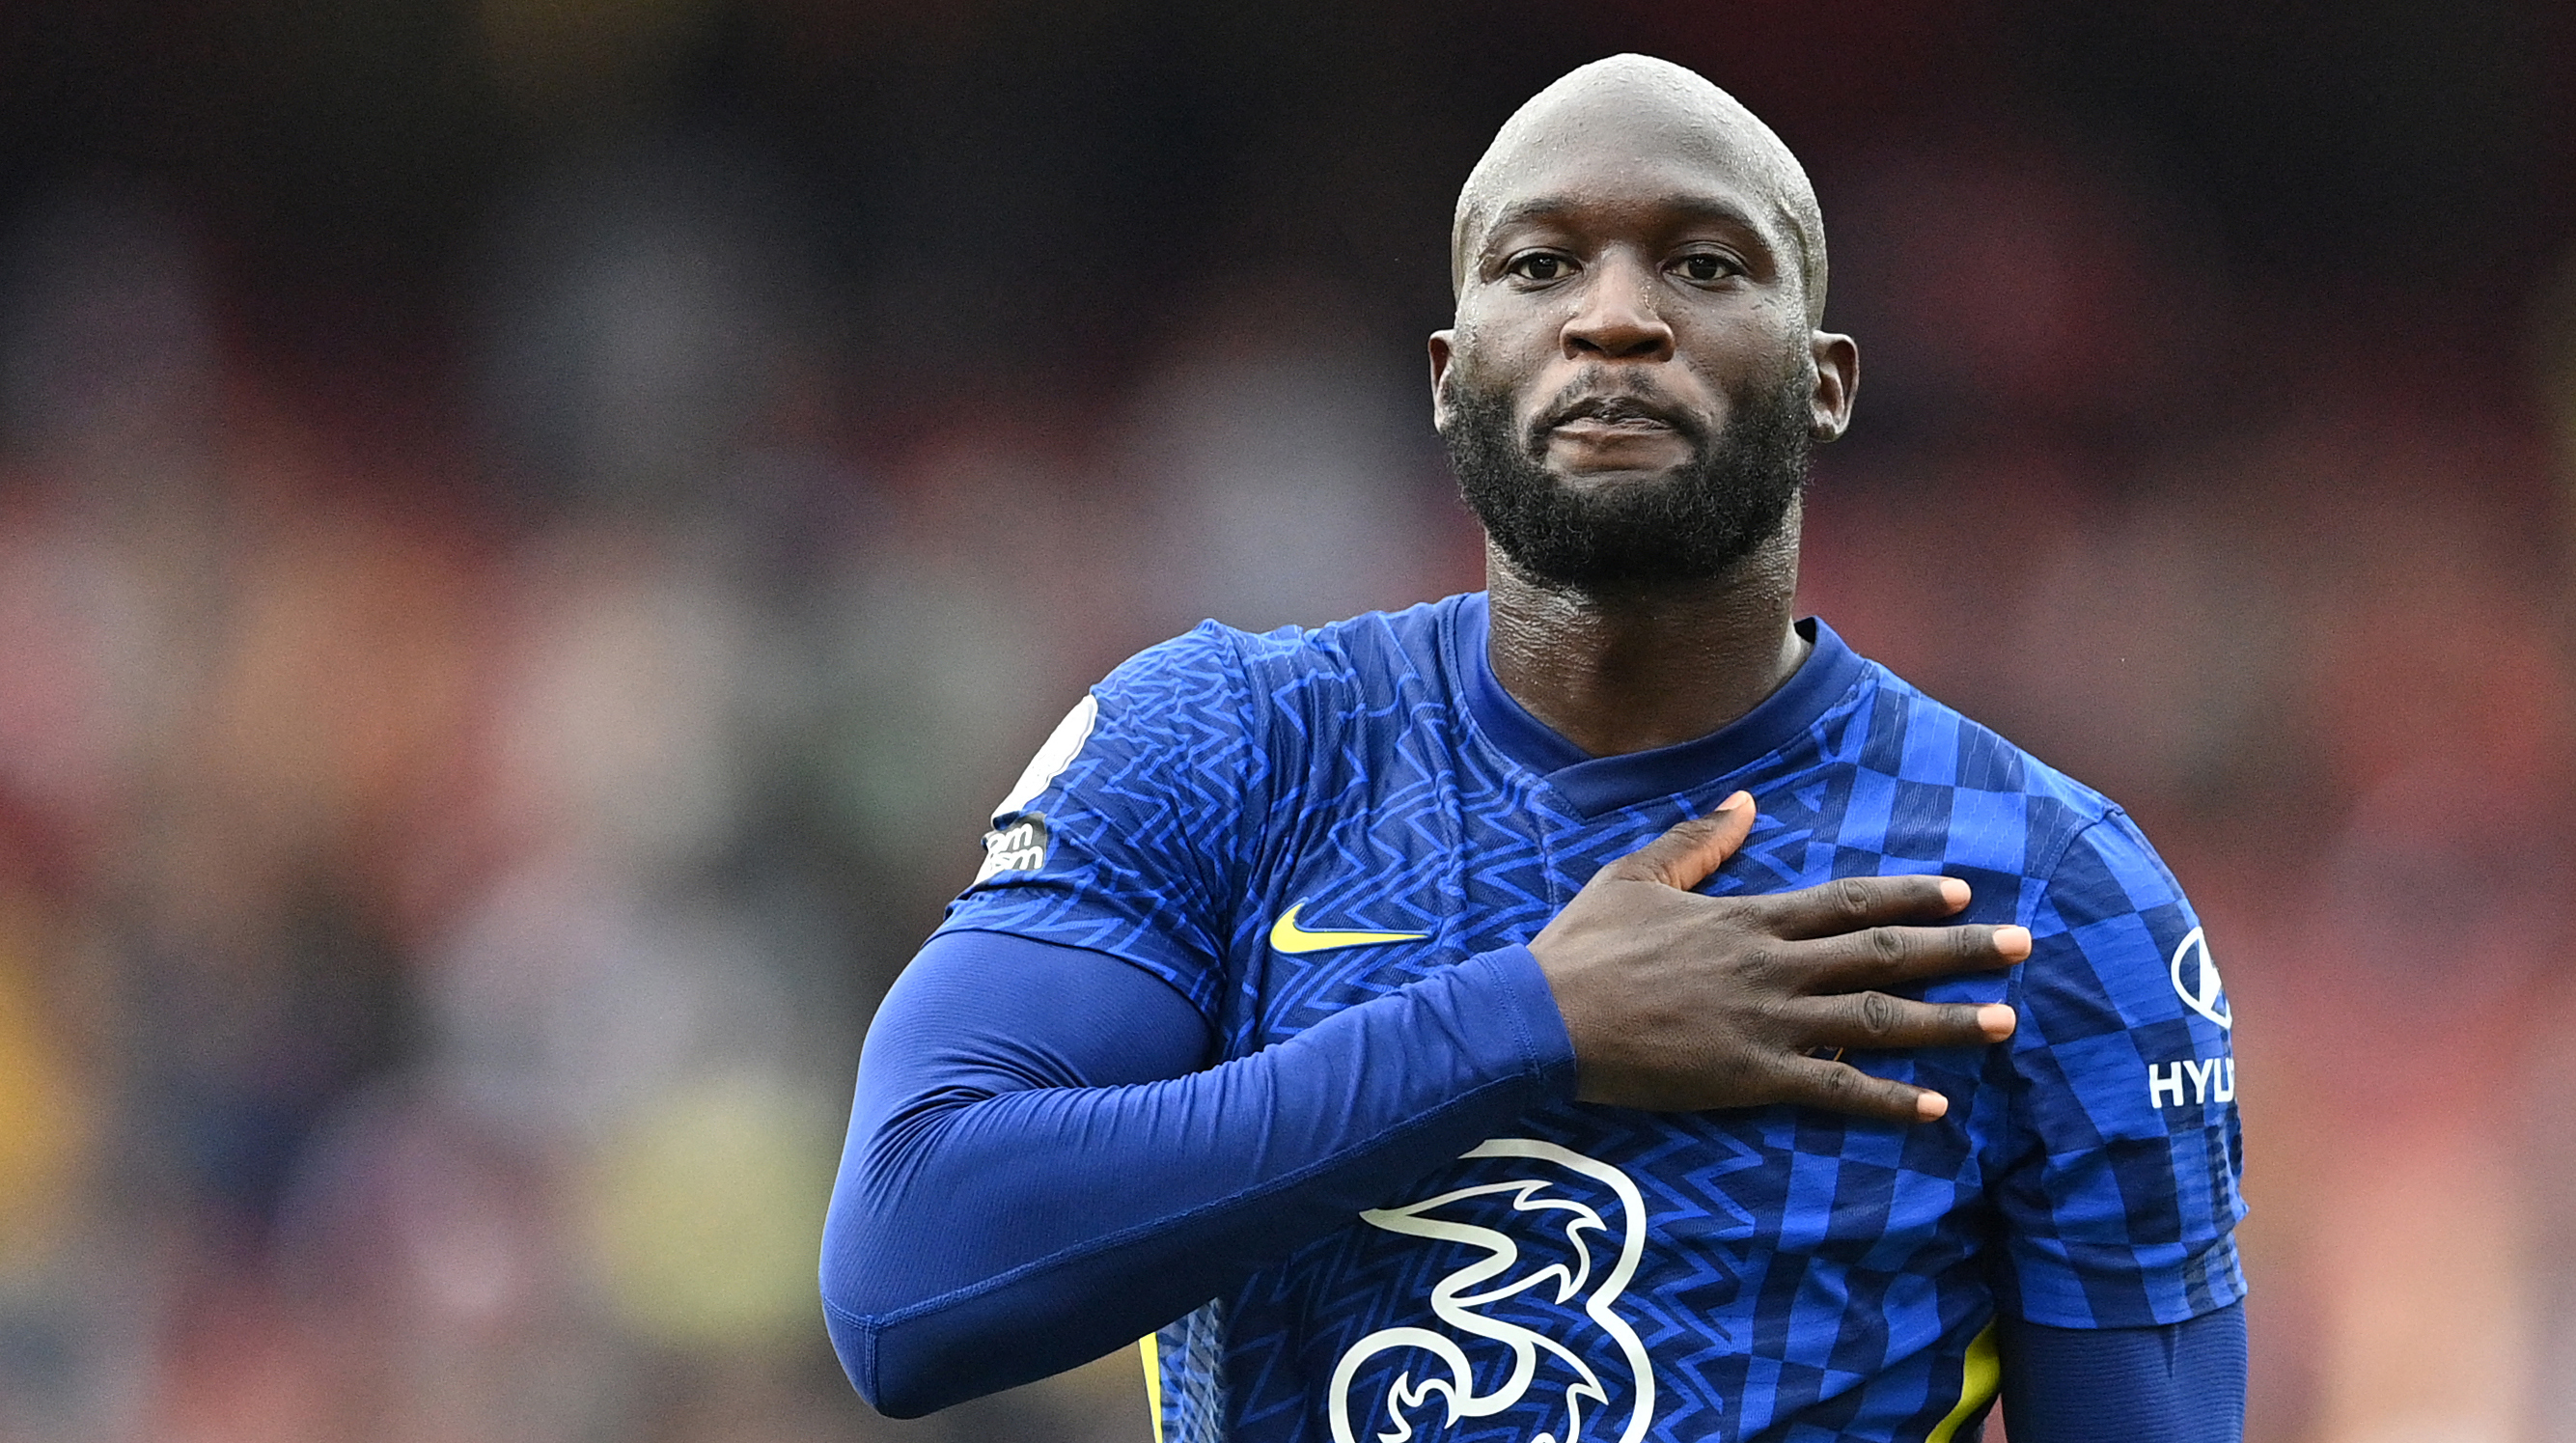 Chelsea's Belgian striker Romelu Lukaku gestures toward supporters at the end of the match during the English Premier League football match between Arsenal and Chelsea at the Emirates Stadium in London on August 22, 2021